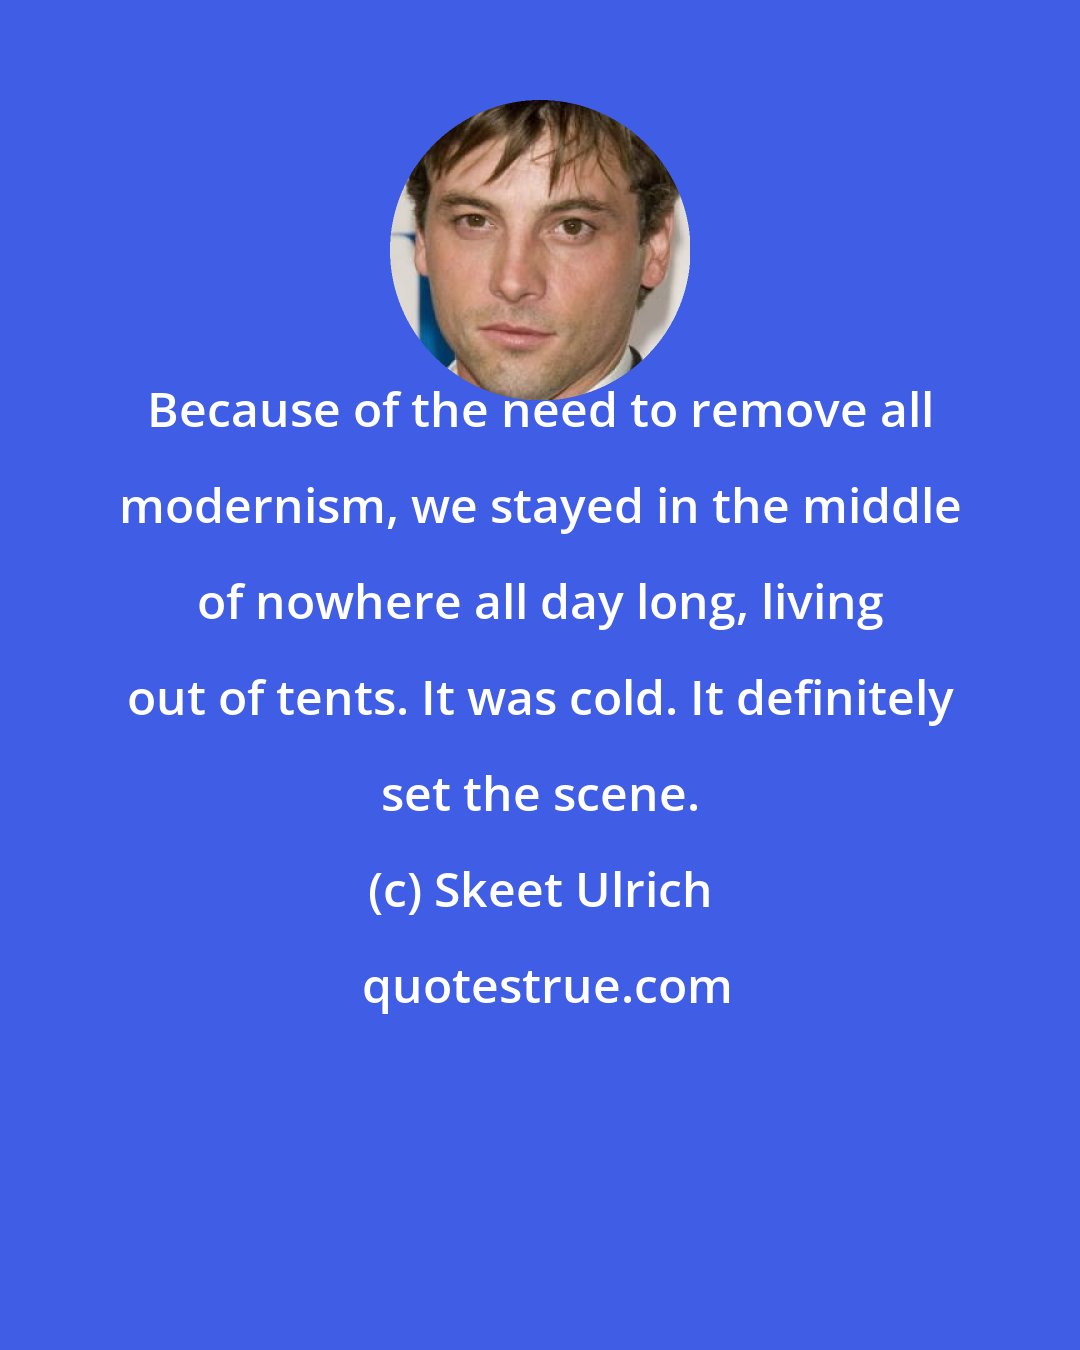 Skeet Ulrich: Because of the need to remove all modernism, we stayed in the middle of nowhere all day long, living out of tents. It was cold. It definitely set the scene.